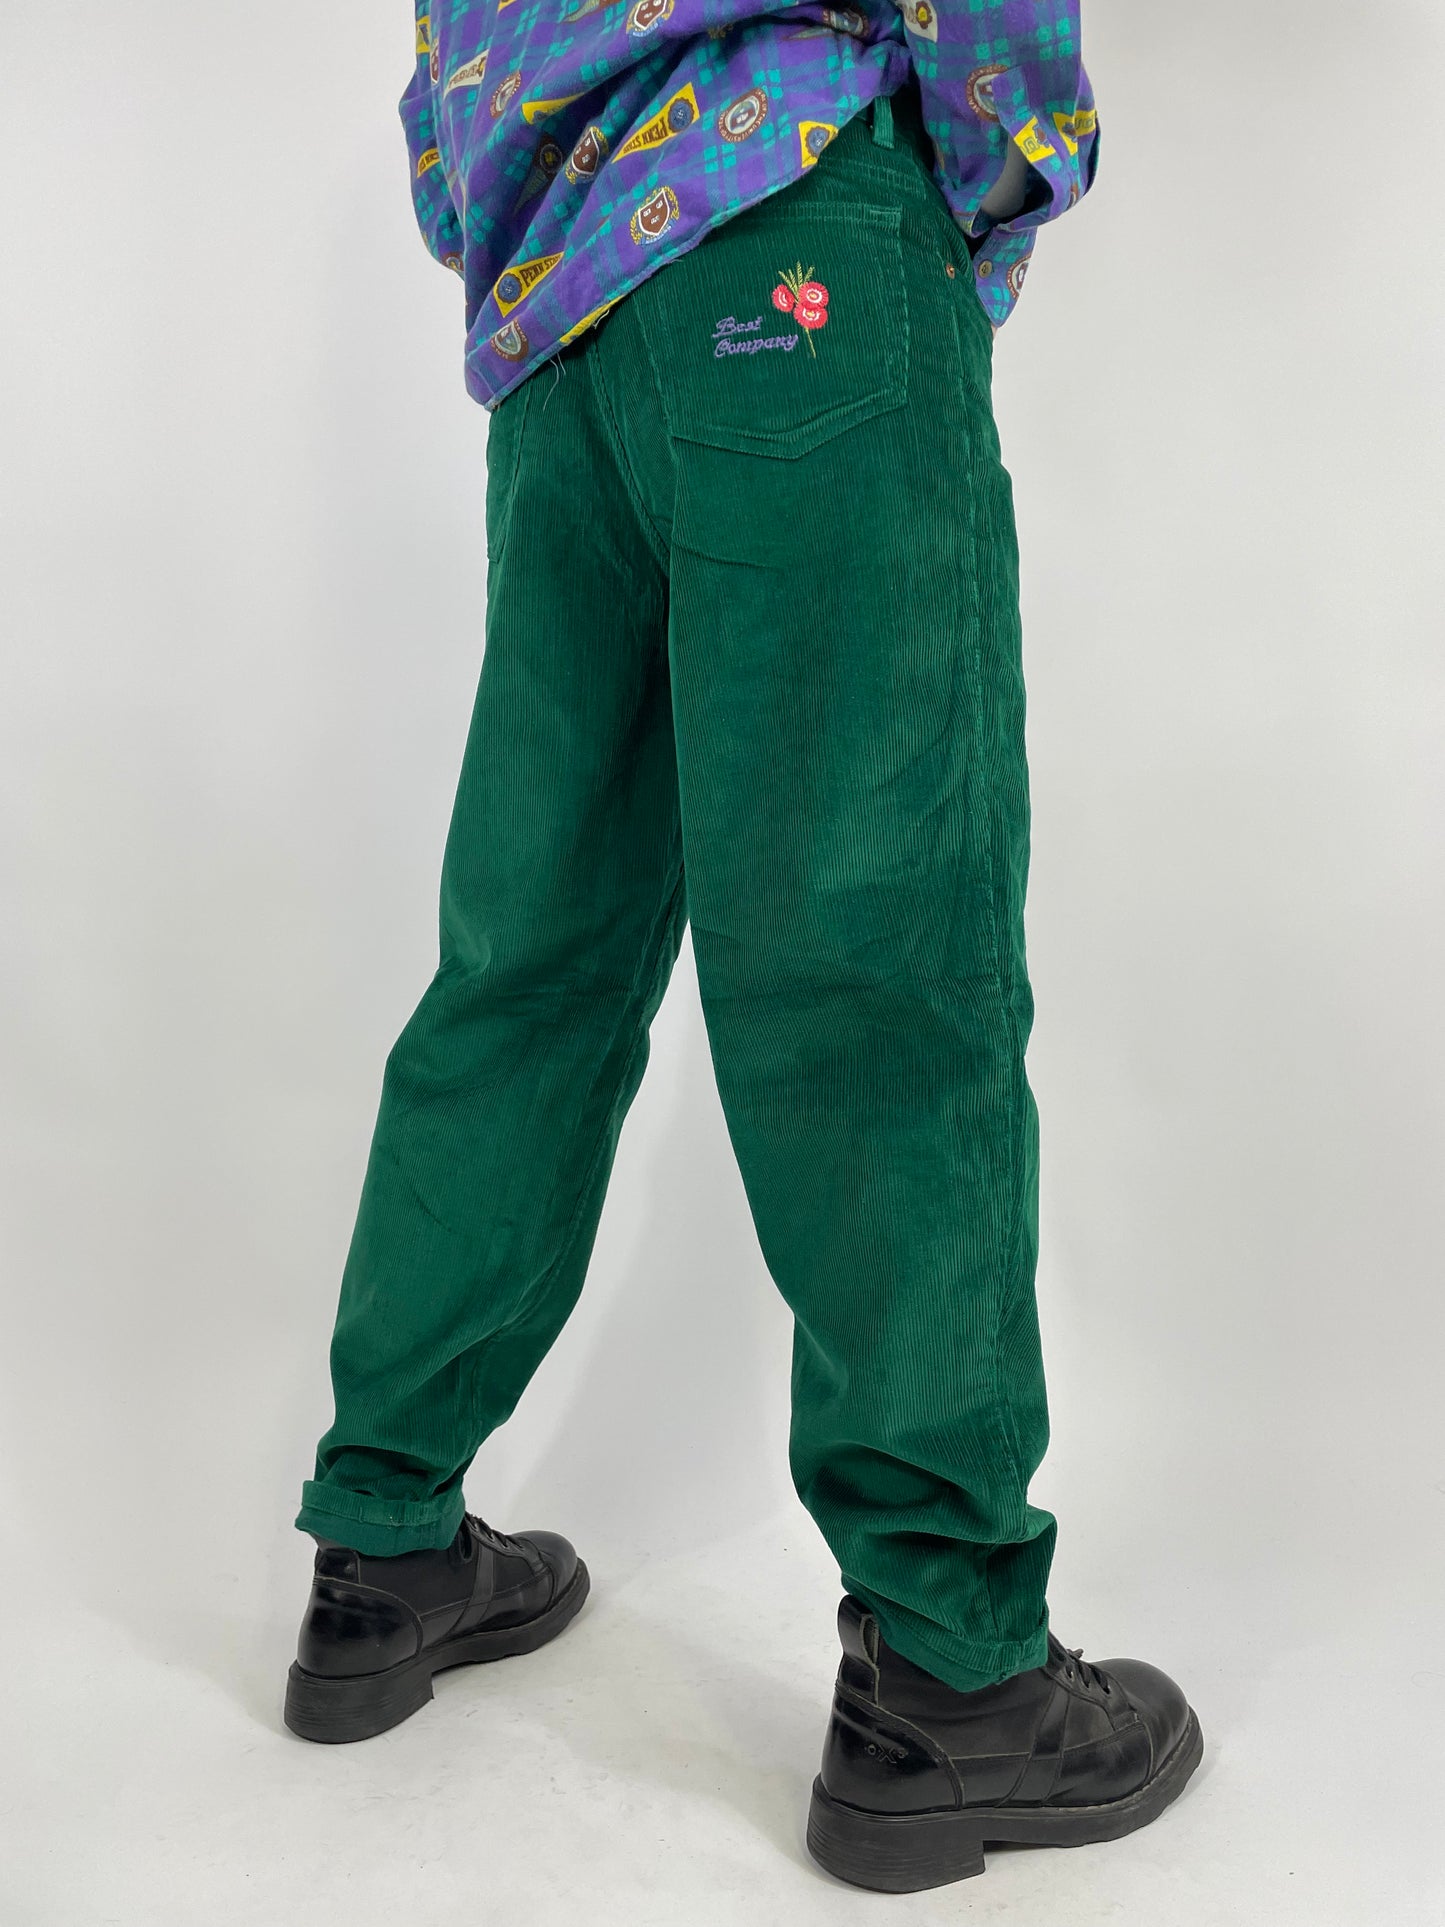 Best Company 1980s trousers